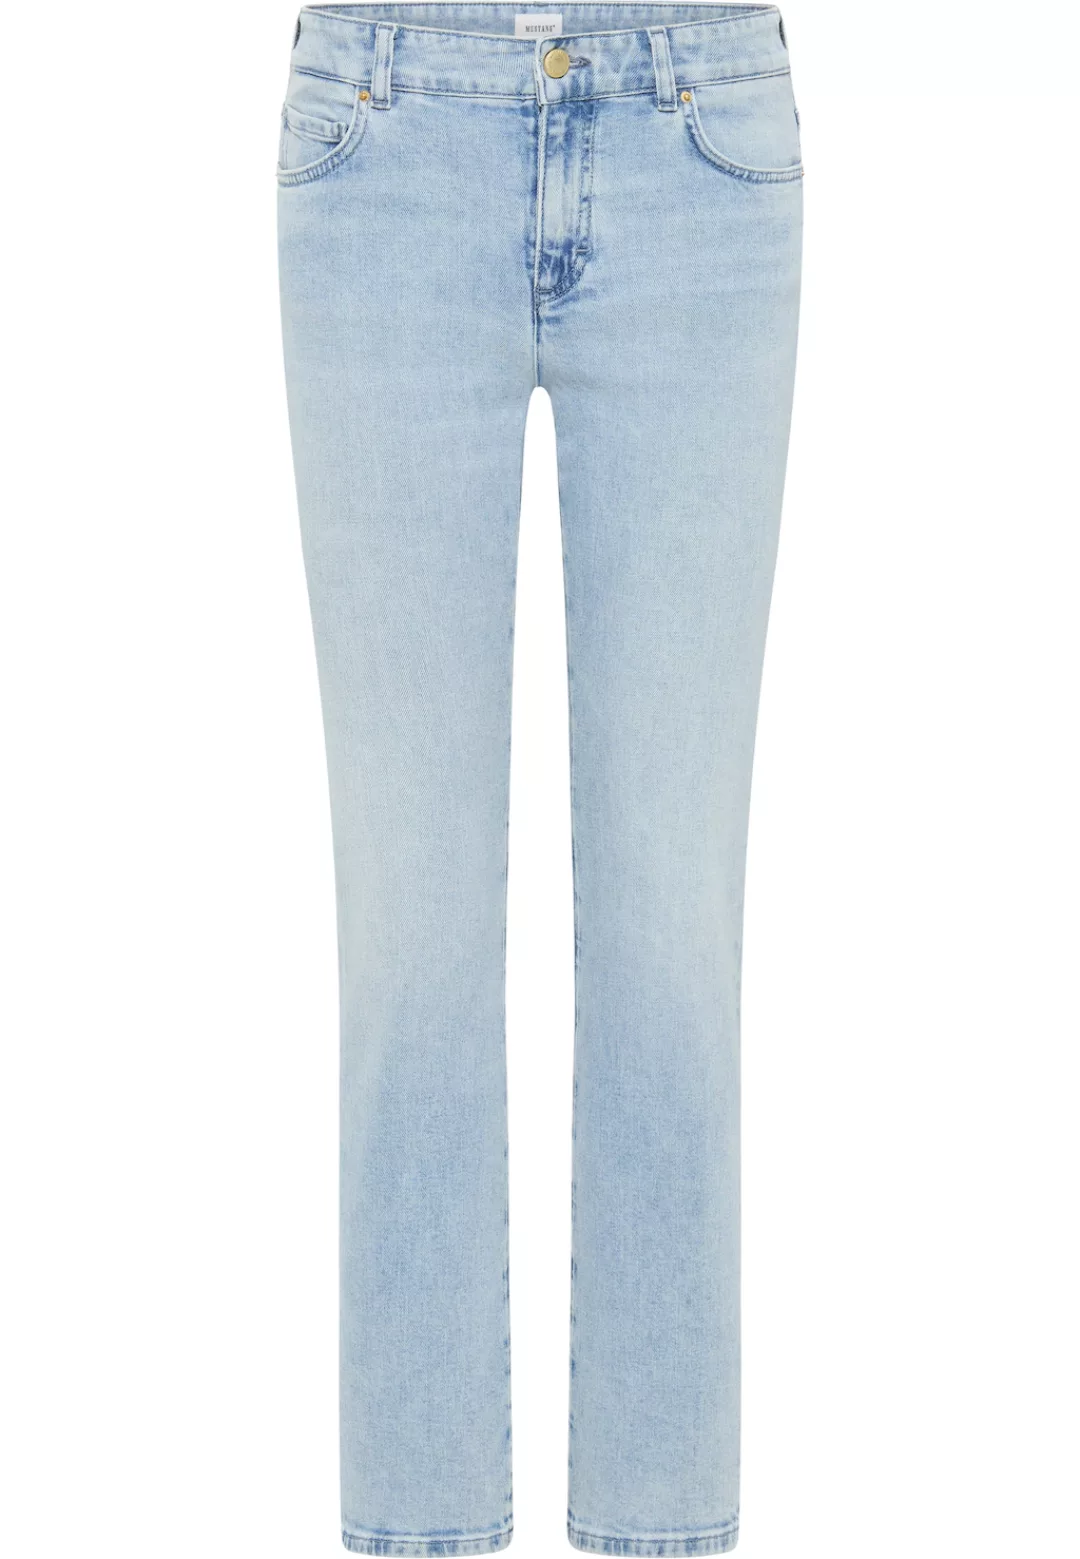 MUSTANG Straight-Jeans "Style Crosby Relaxed Straight" günstig online kaufen